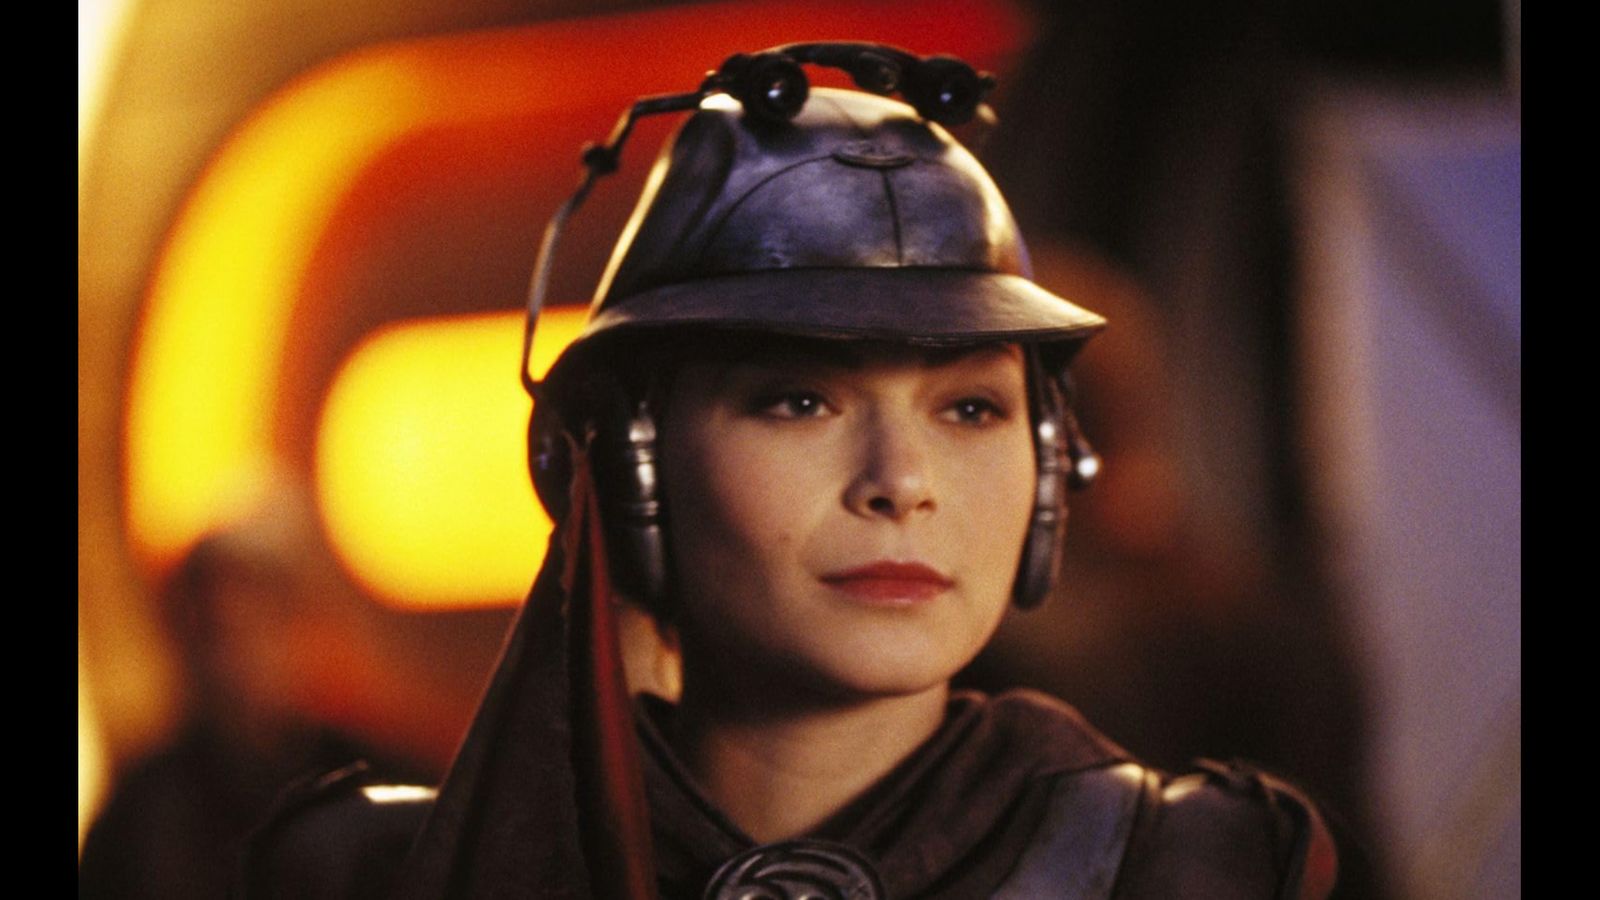 Zam Wesell first appeared in Star Wars: Attack of the Clones. Played by Leeanna Walsman

